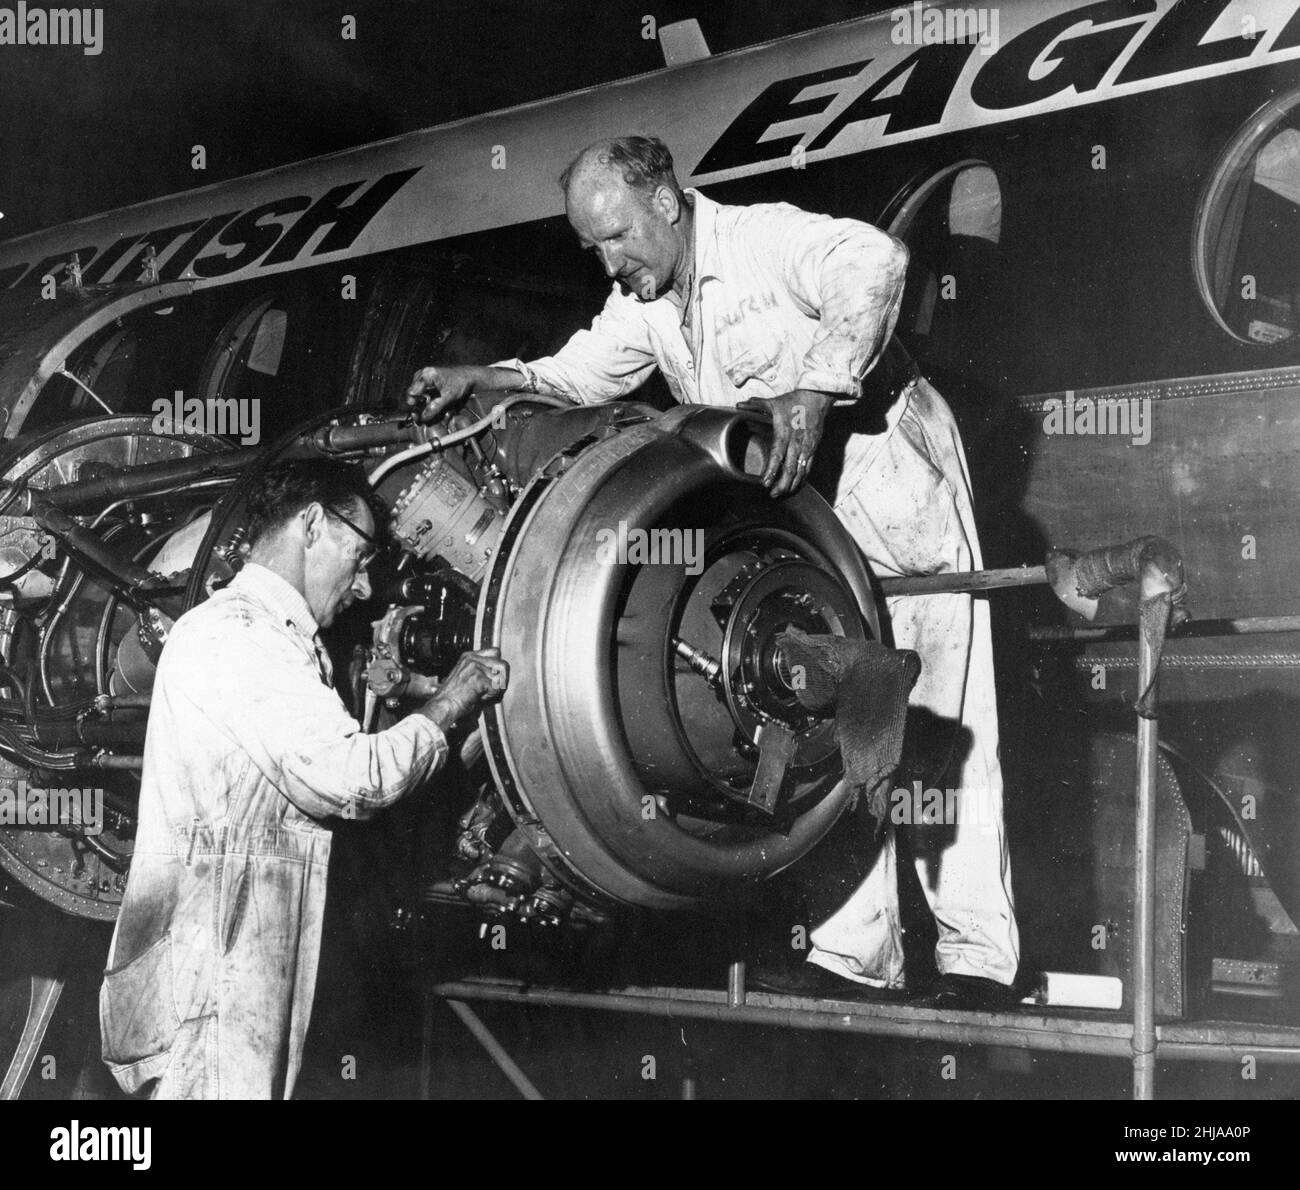 British Eagle International Airlines a major British independent airline that operated from 1948 until it went into liquidation in 1968. Our Picture Shows ... British Eagle engineers carry out maintenance on aircraft engine, Liverpool Speke Airport, Thursday 23rd July 1964. Stock Photo